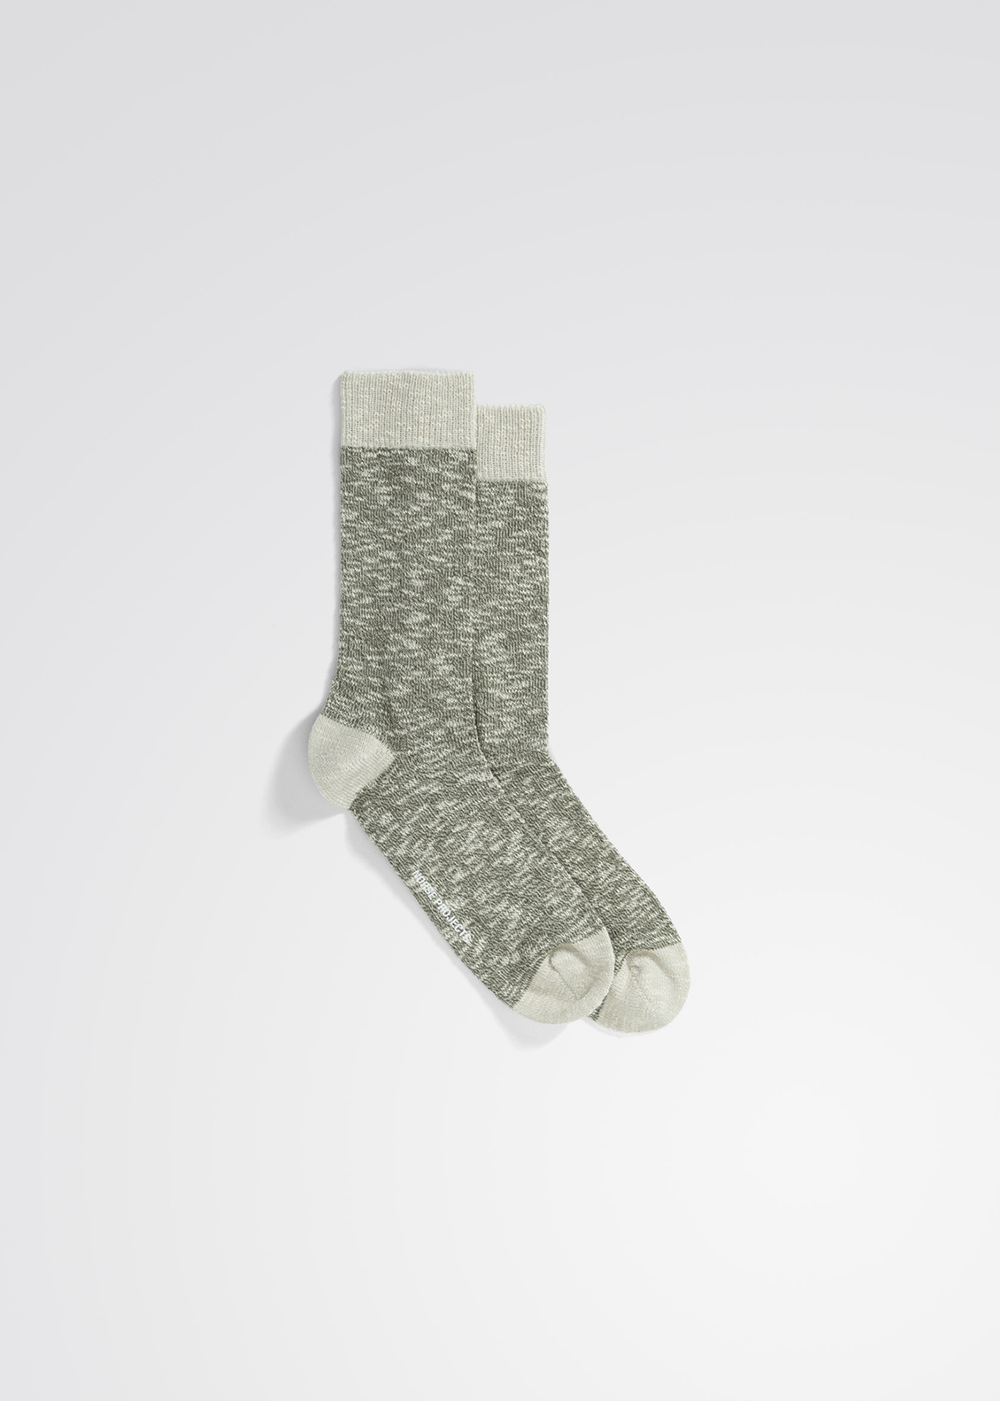 Norse Project Sock with contrasting heel, toe, and cuff in sediment green.